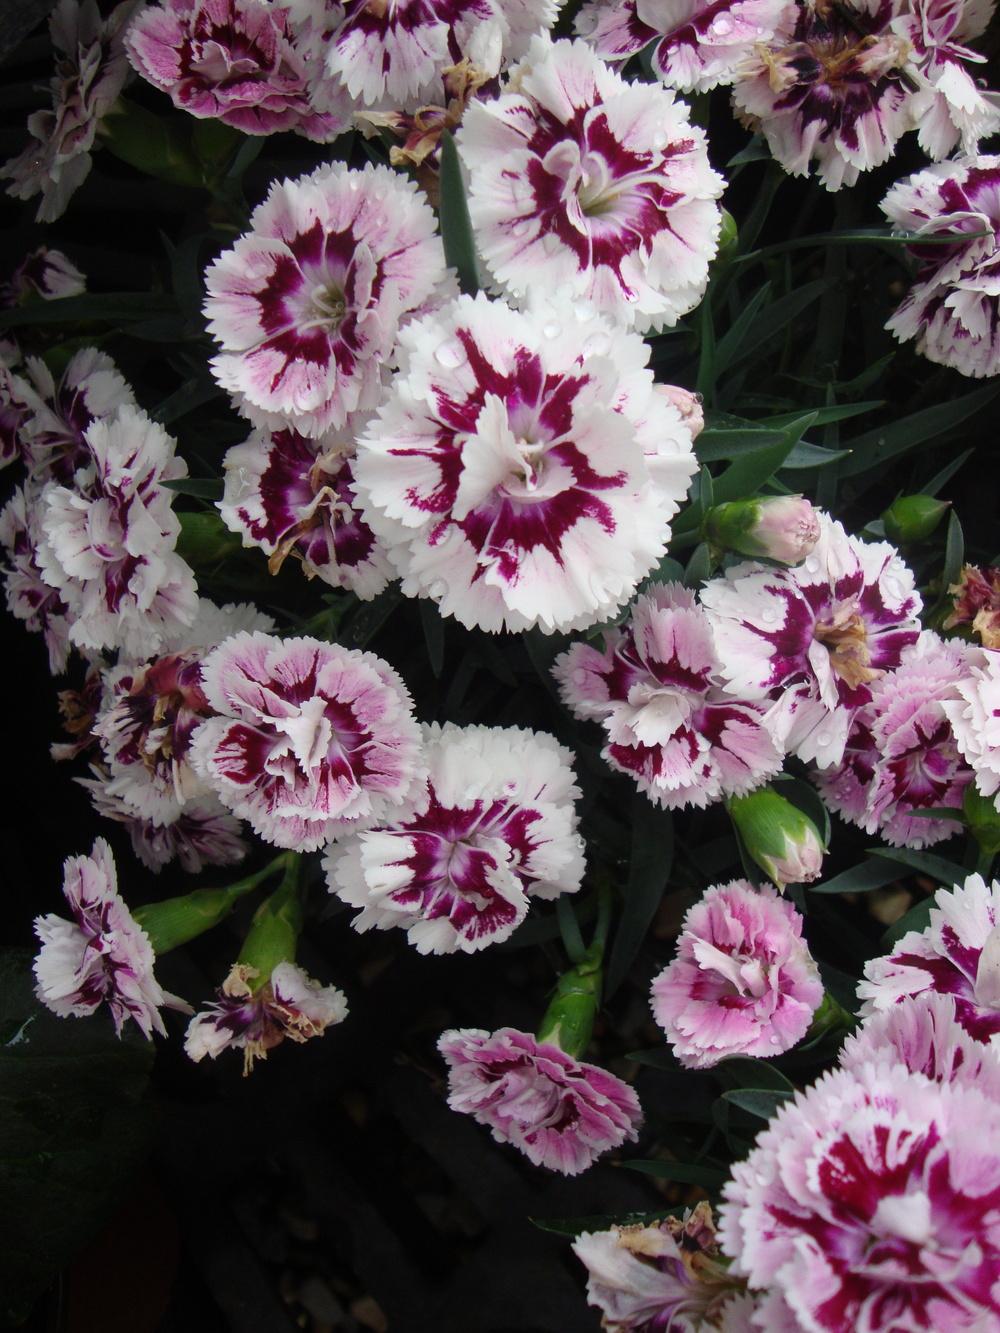 Photo of Dianthus uploaded by Paul2032